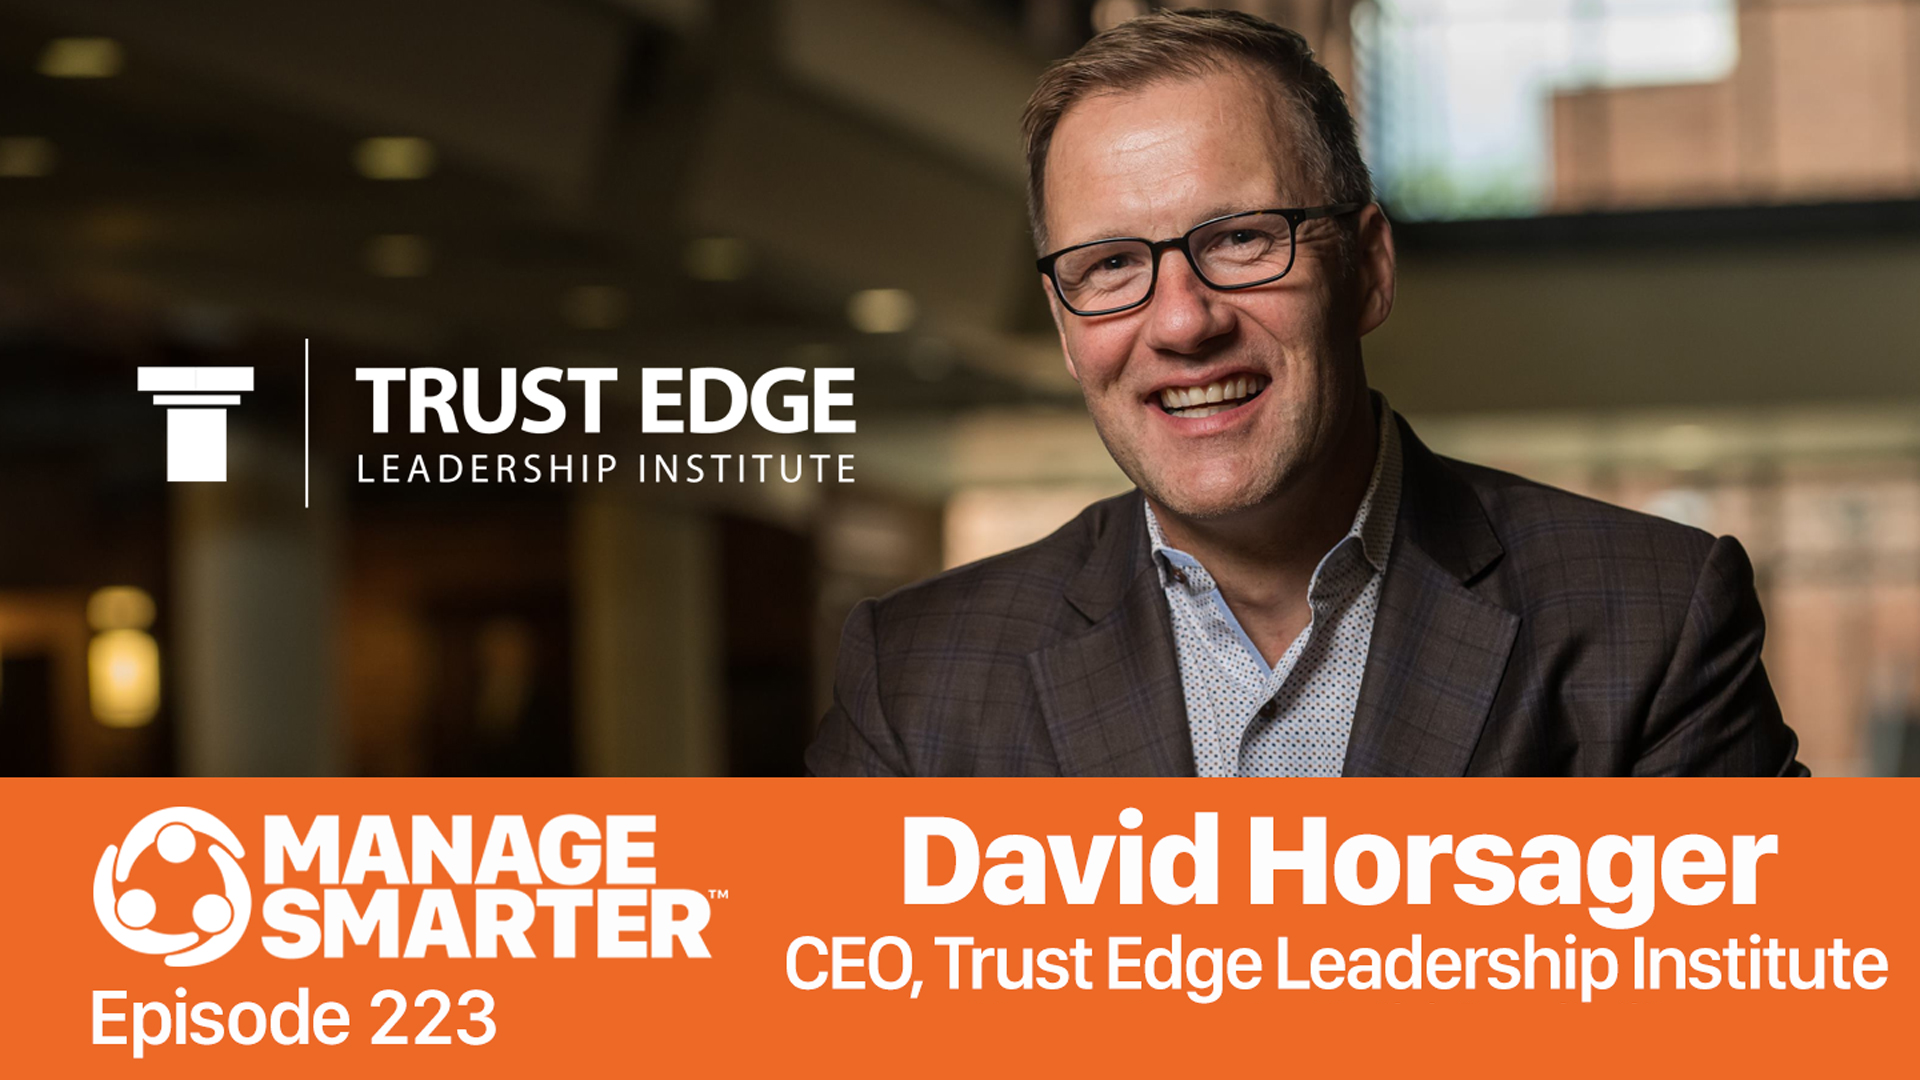 Featured image for “Manage Smarter 223 — David Horsager: Fostering a High Trust Culture”